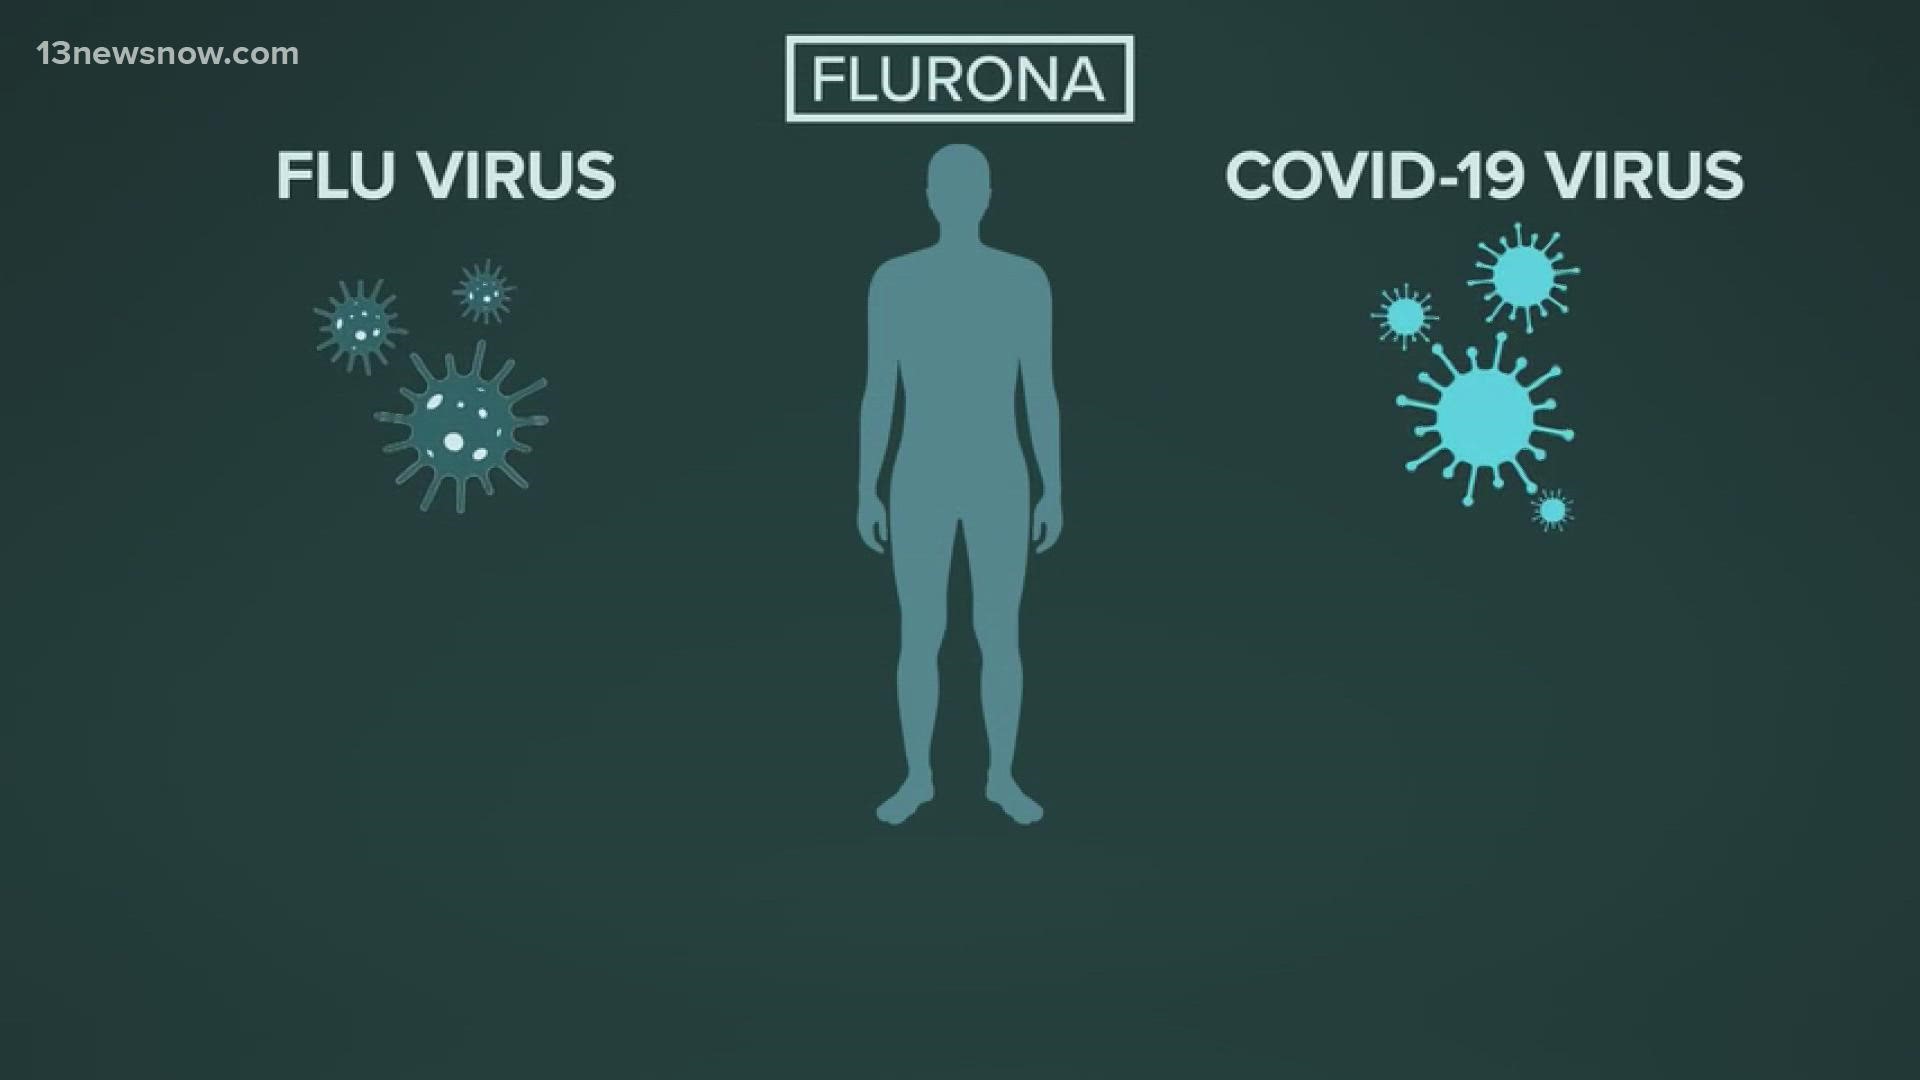 One Hampton Roads doctor said it's not common to get the flu and COVID-19 at the same time, but it can happen.